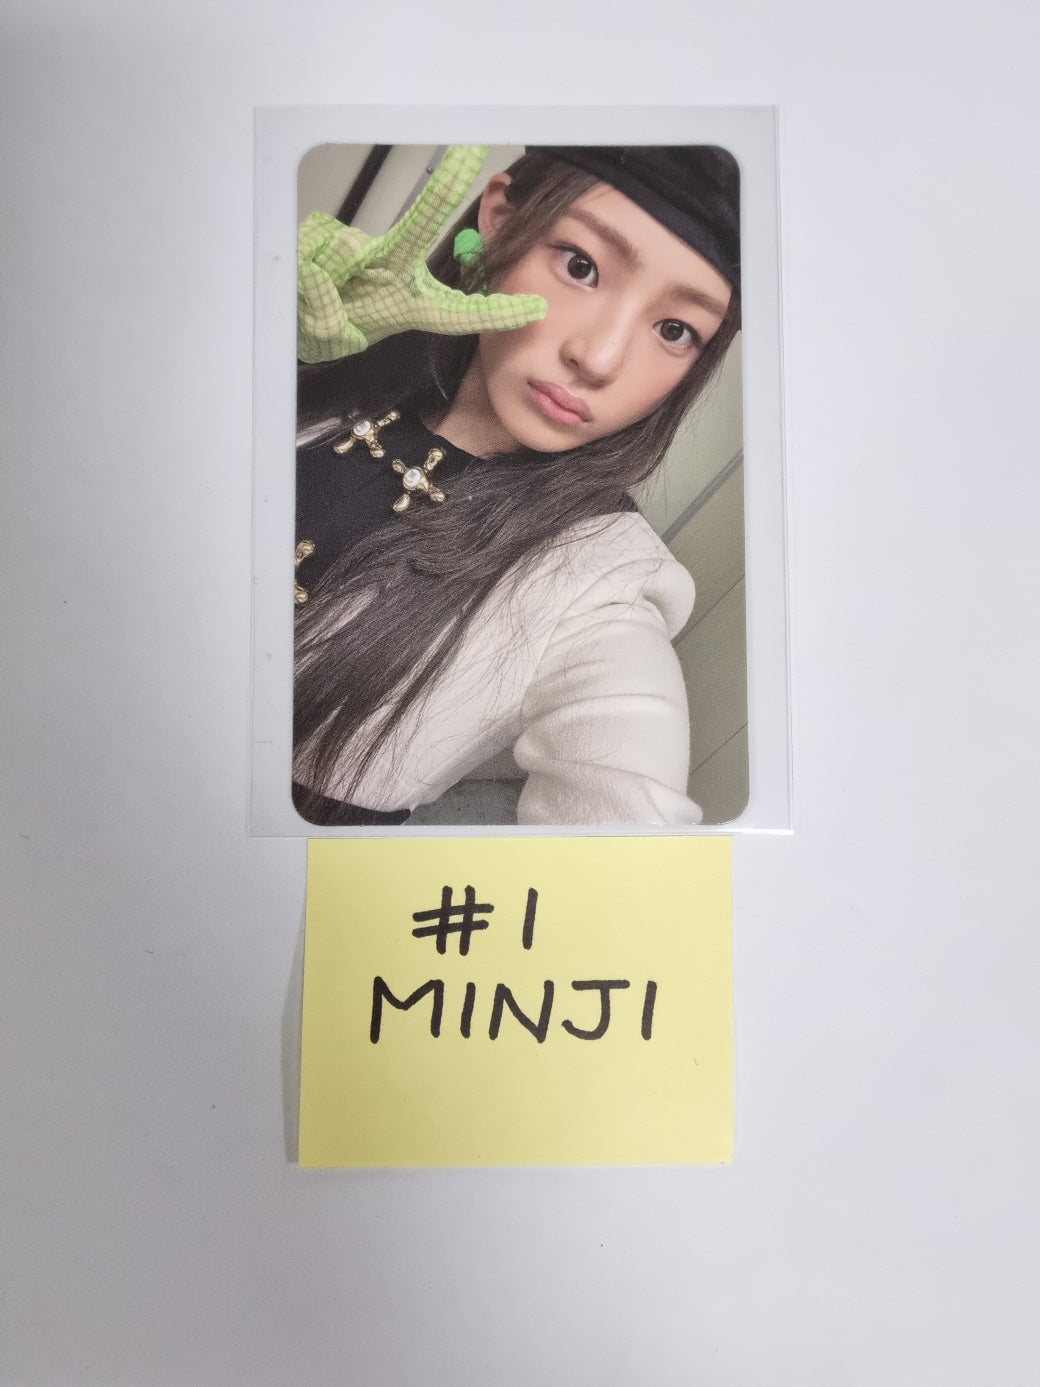 New Jeans ‘OMG’ - Broadcast Photocard